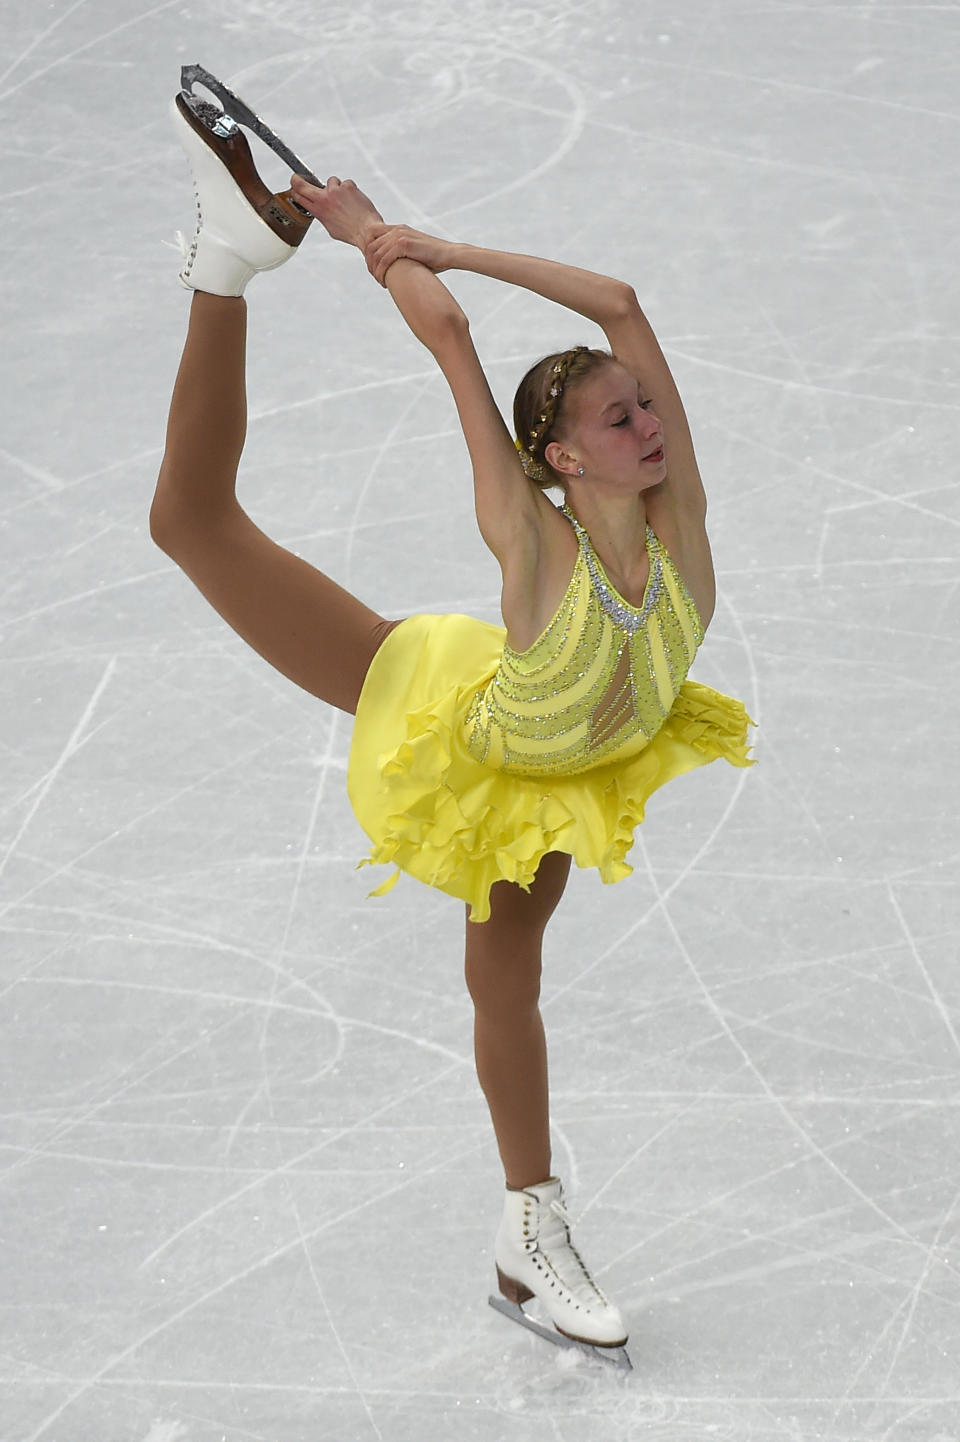 <p>Polina Edmunds’ unitard had it all – bright colors, big gems, sheer paneling. The 2014 Olympian has consistently gone bold with her outfits at skating competitions including this purple number and a bright yellow dress in Sochi. </p>